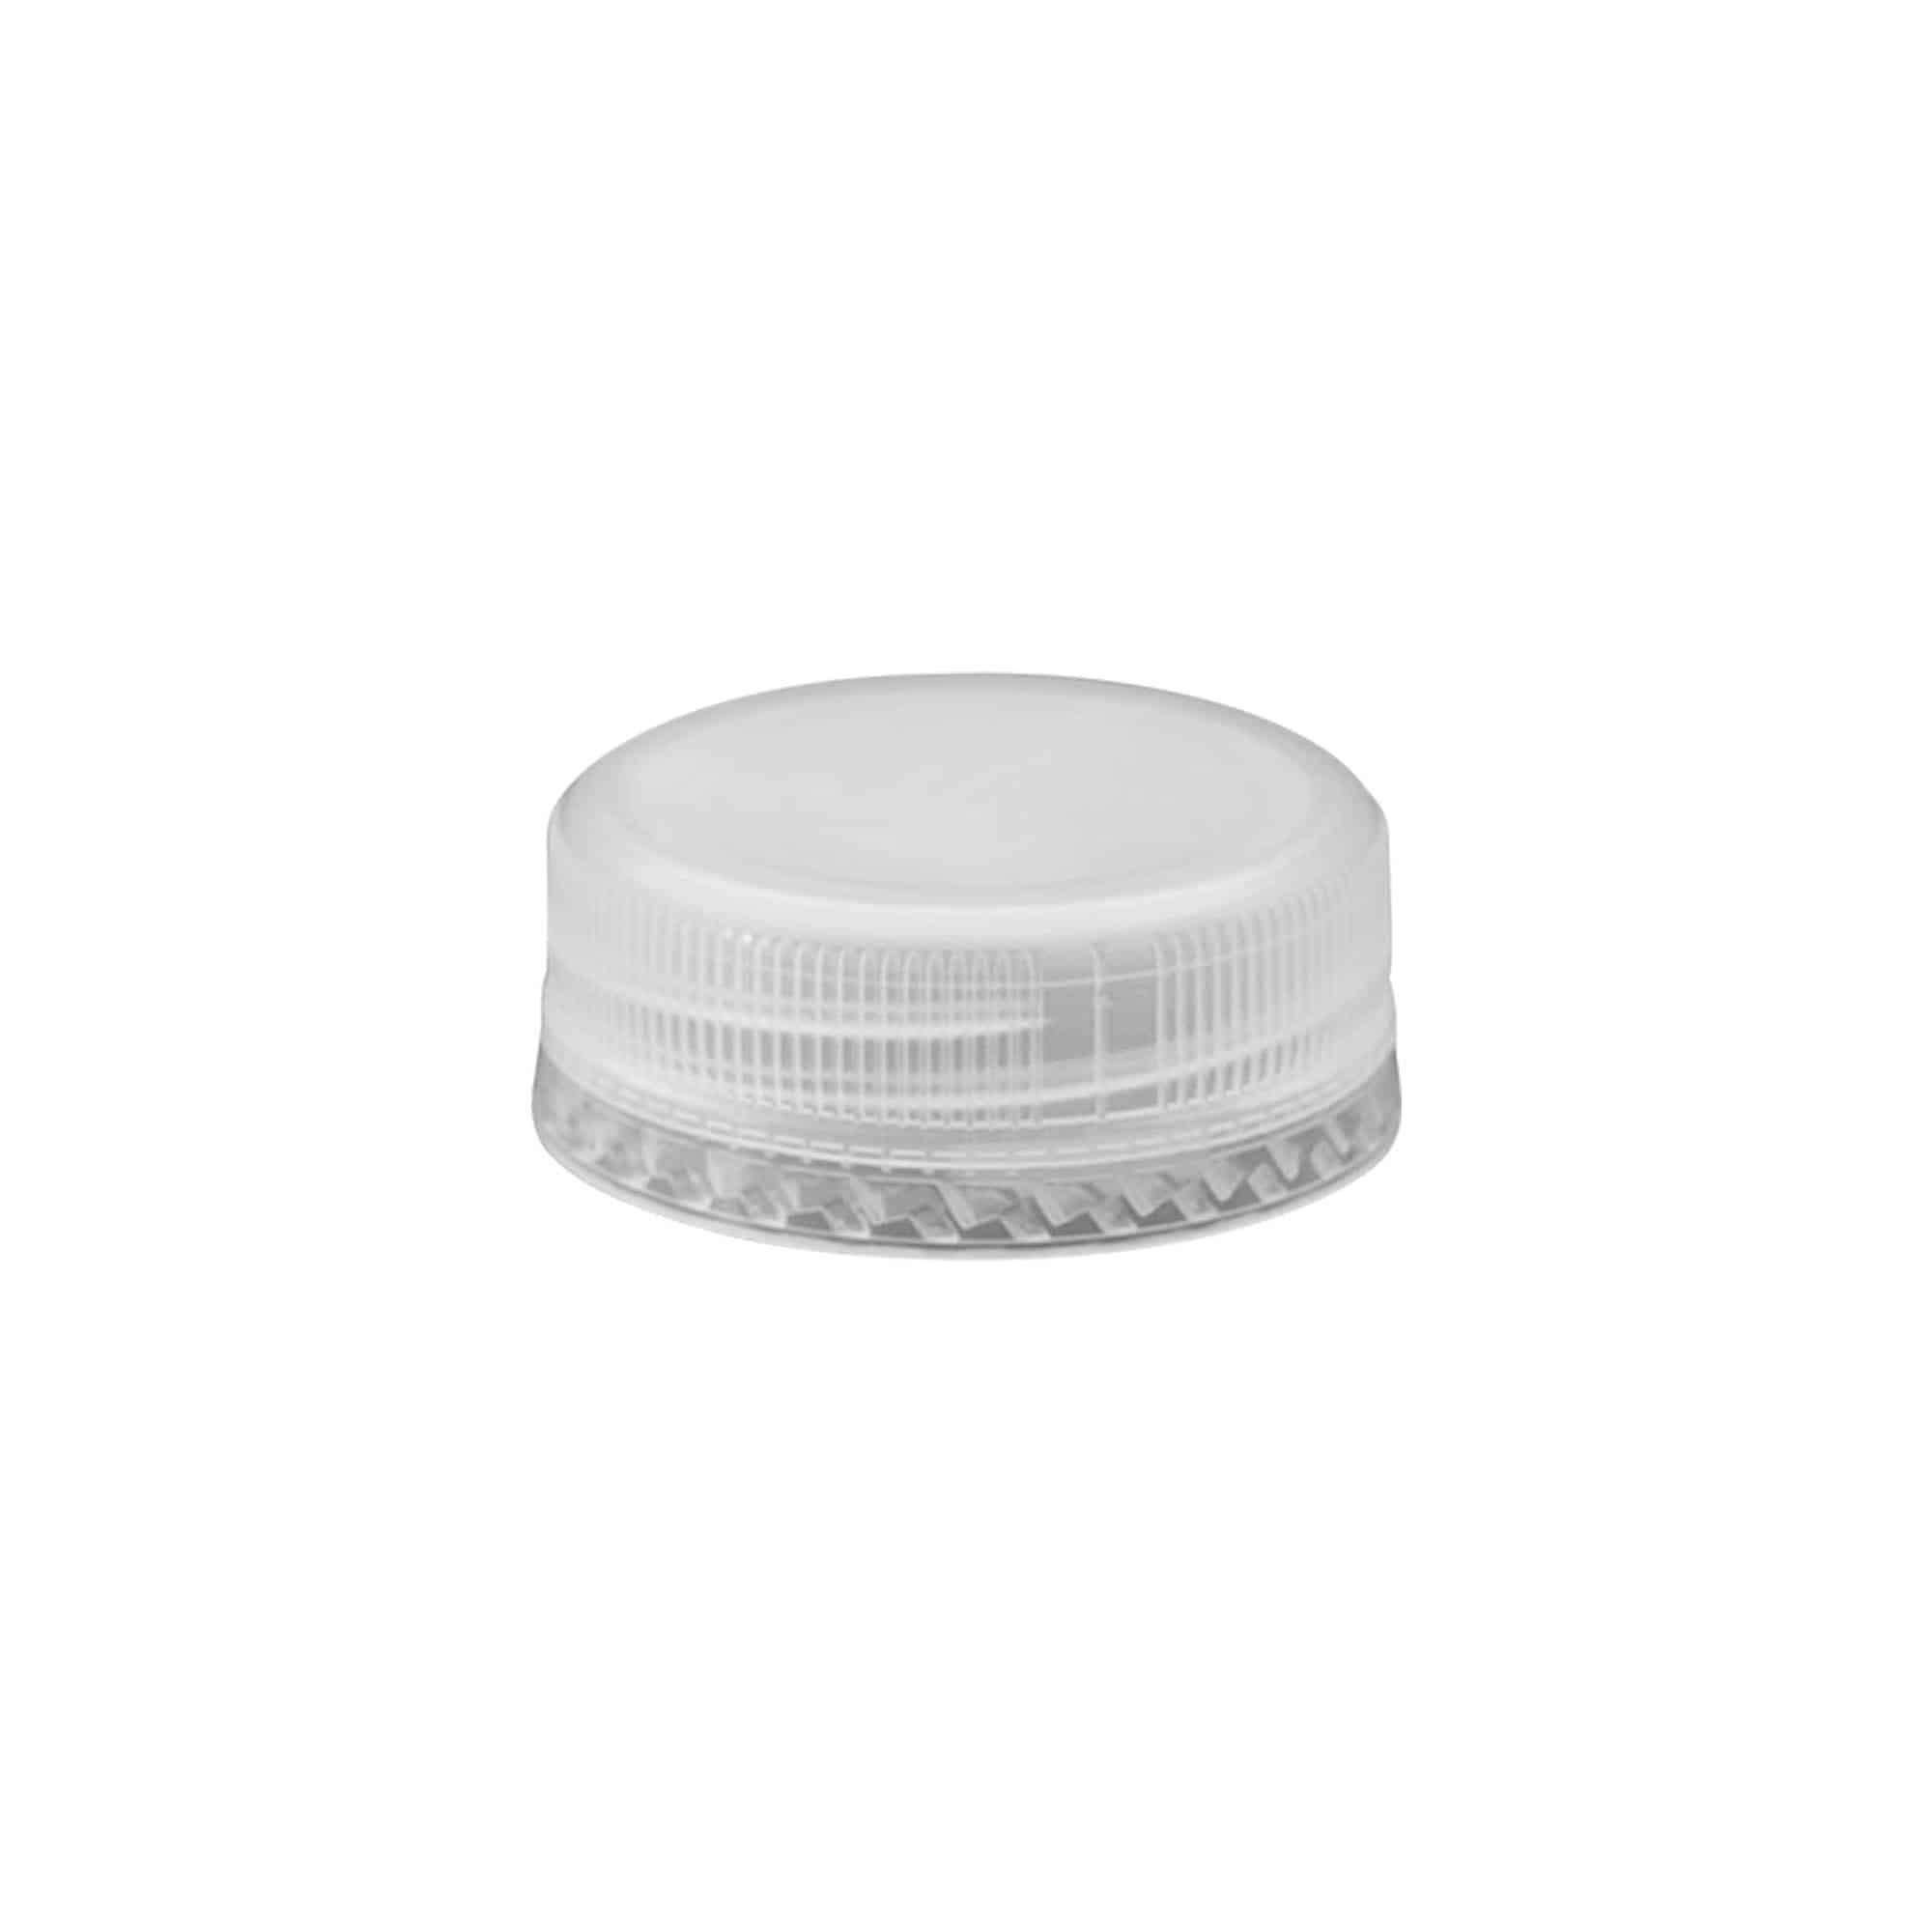 Screw cap for two start thread, PE plastic, white, for opening: PET 38 mm